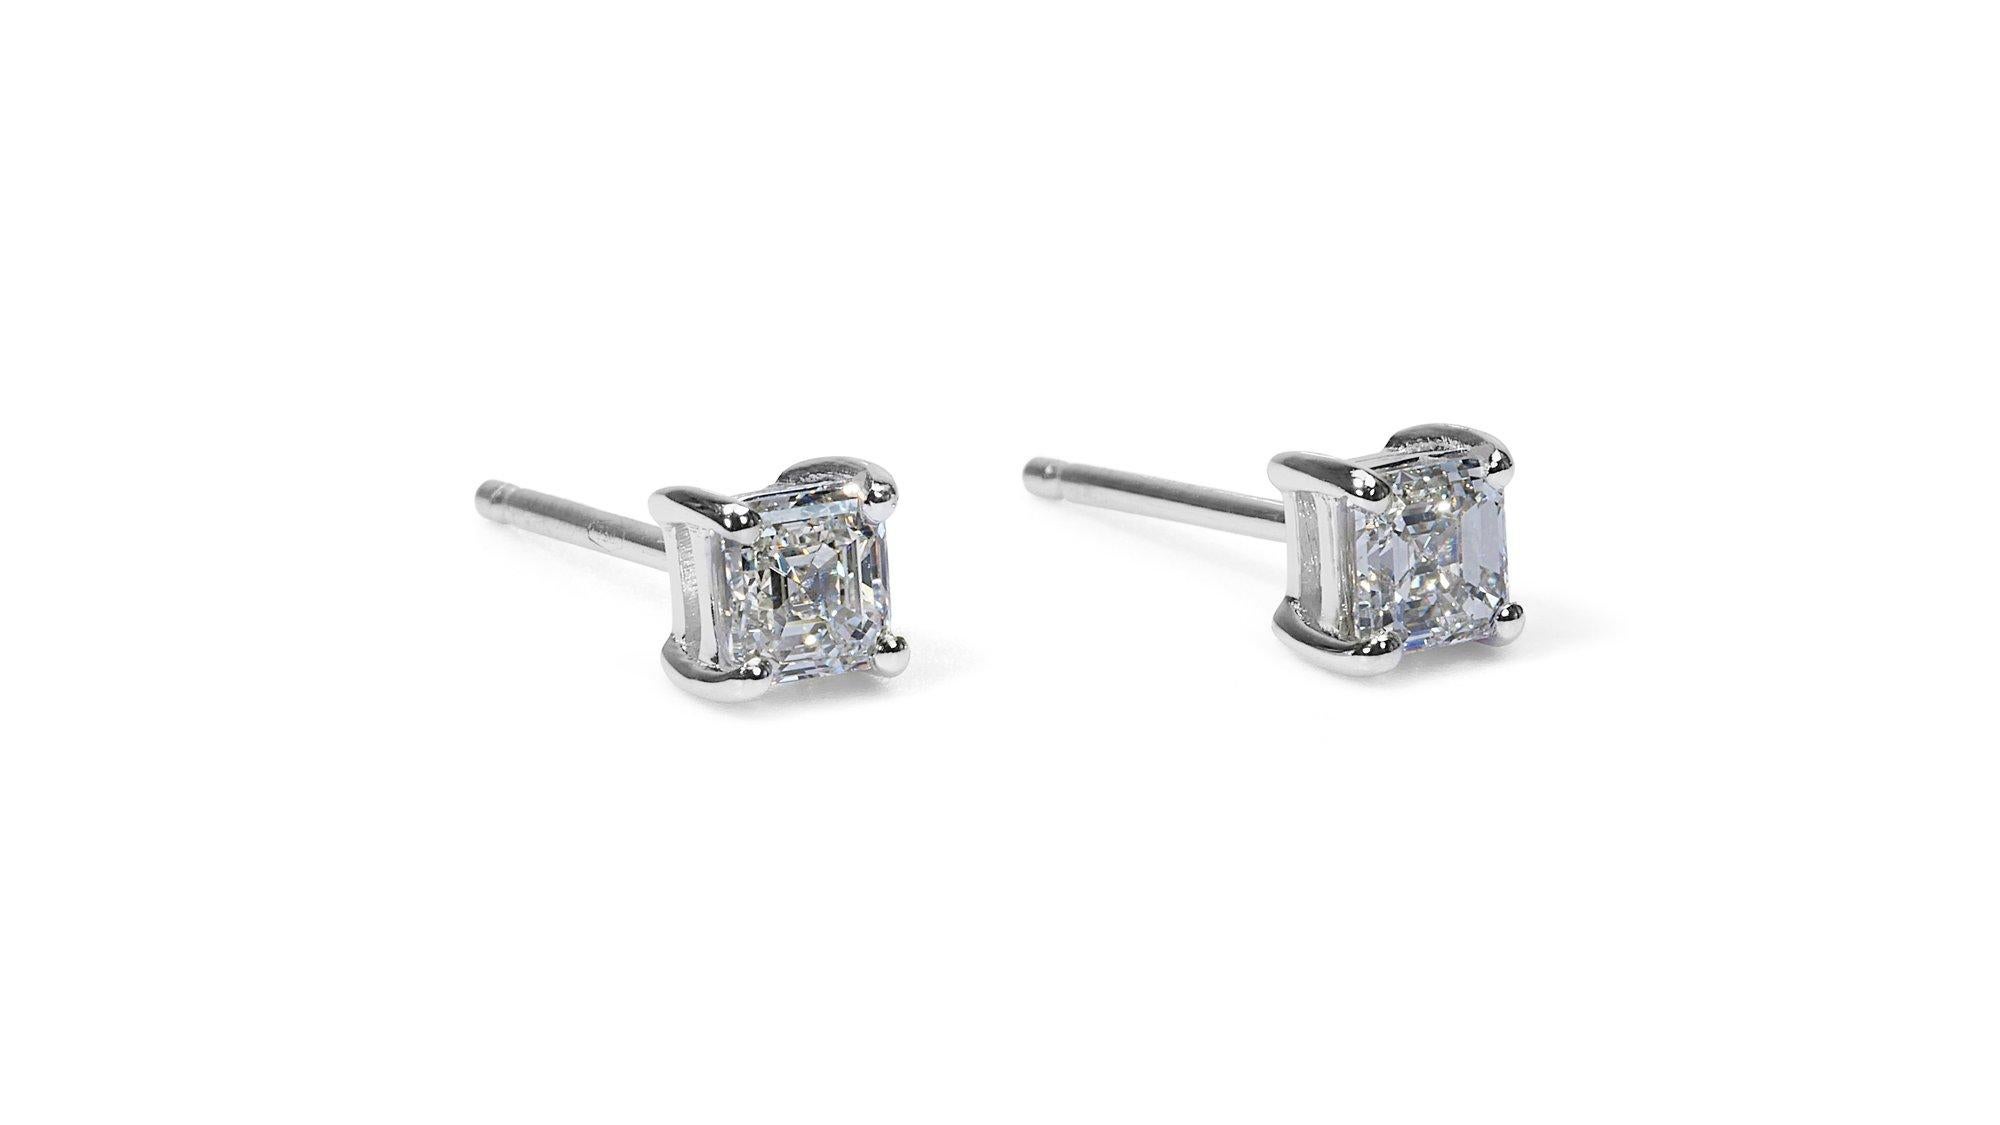 Women's Sparkling 18k White gold Stud Earrings with 1.02 ct natural diamonds GIA Cert For Sale